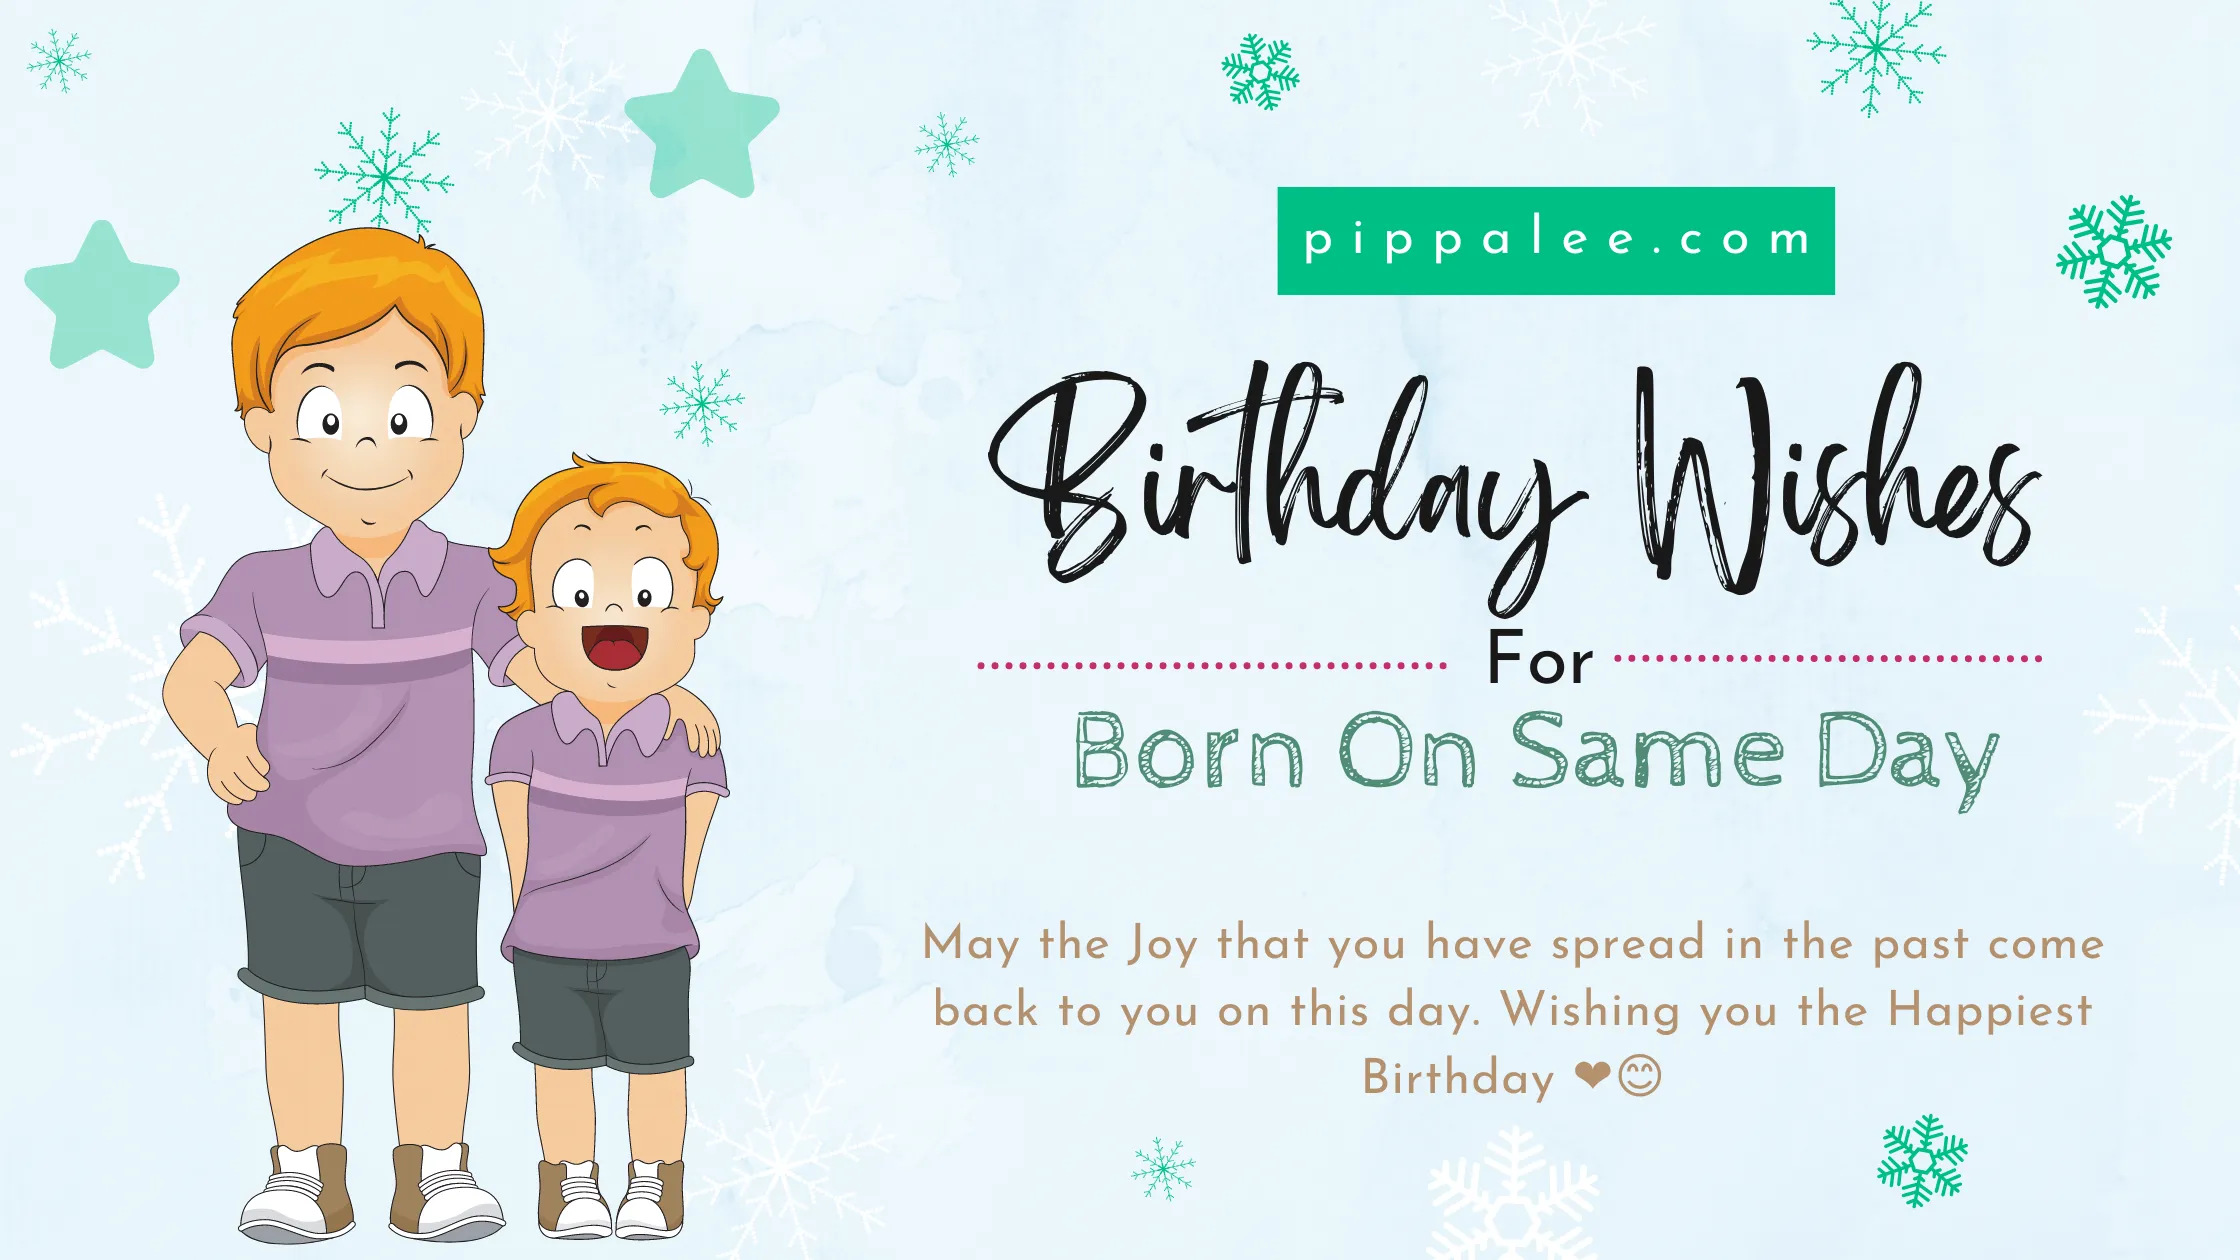 Born On Same Day Birthday Wishes - Wishes & Messages